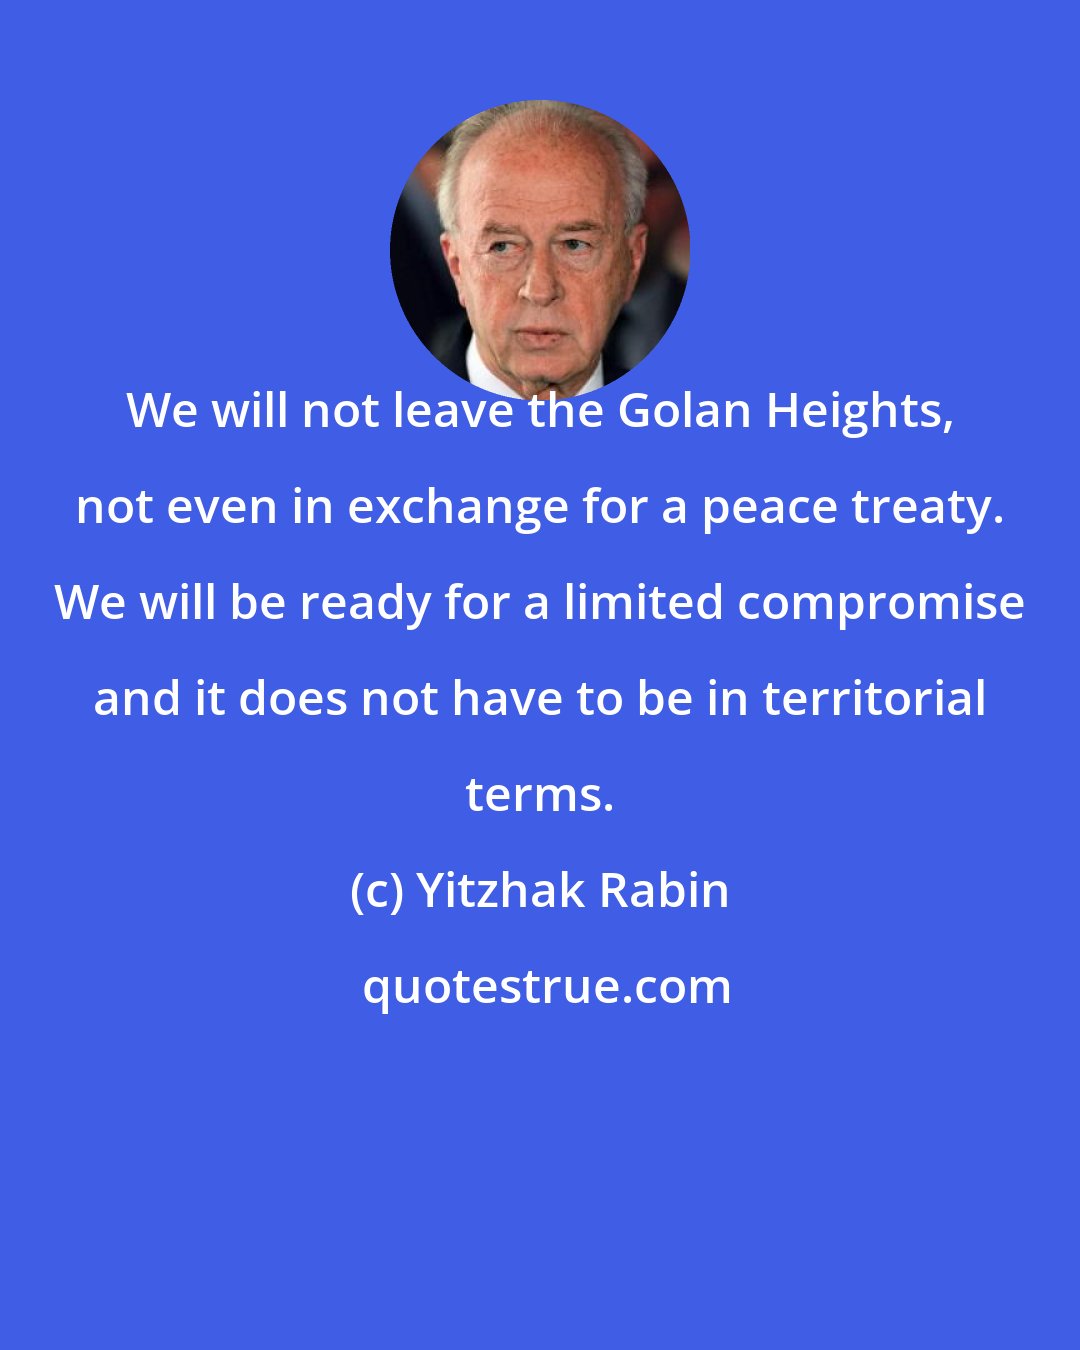 Yitzhak Rabin: We will not leave the Golan Heights, not even in exchange for a peace treaty. We will be ready for a limited compromise and it does not have to be in territorial terms.